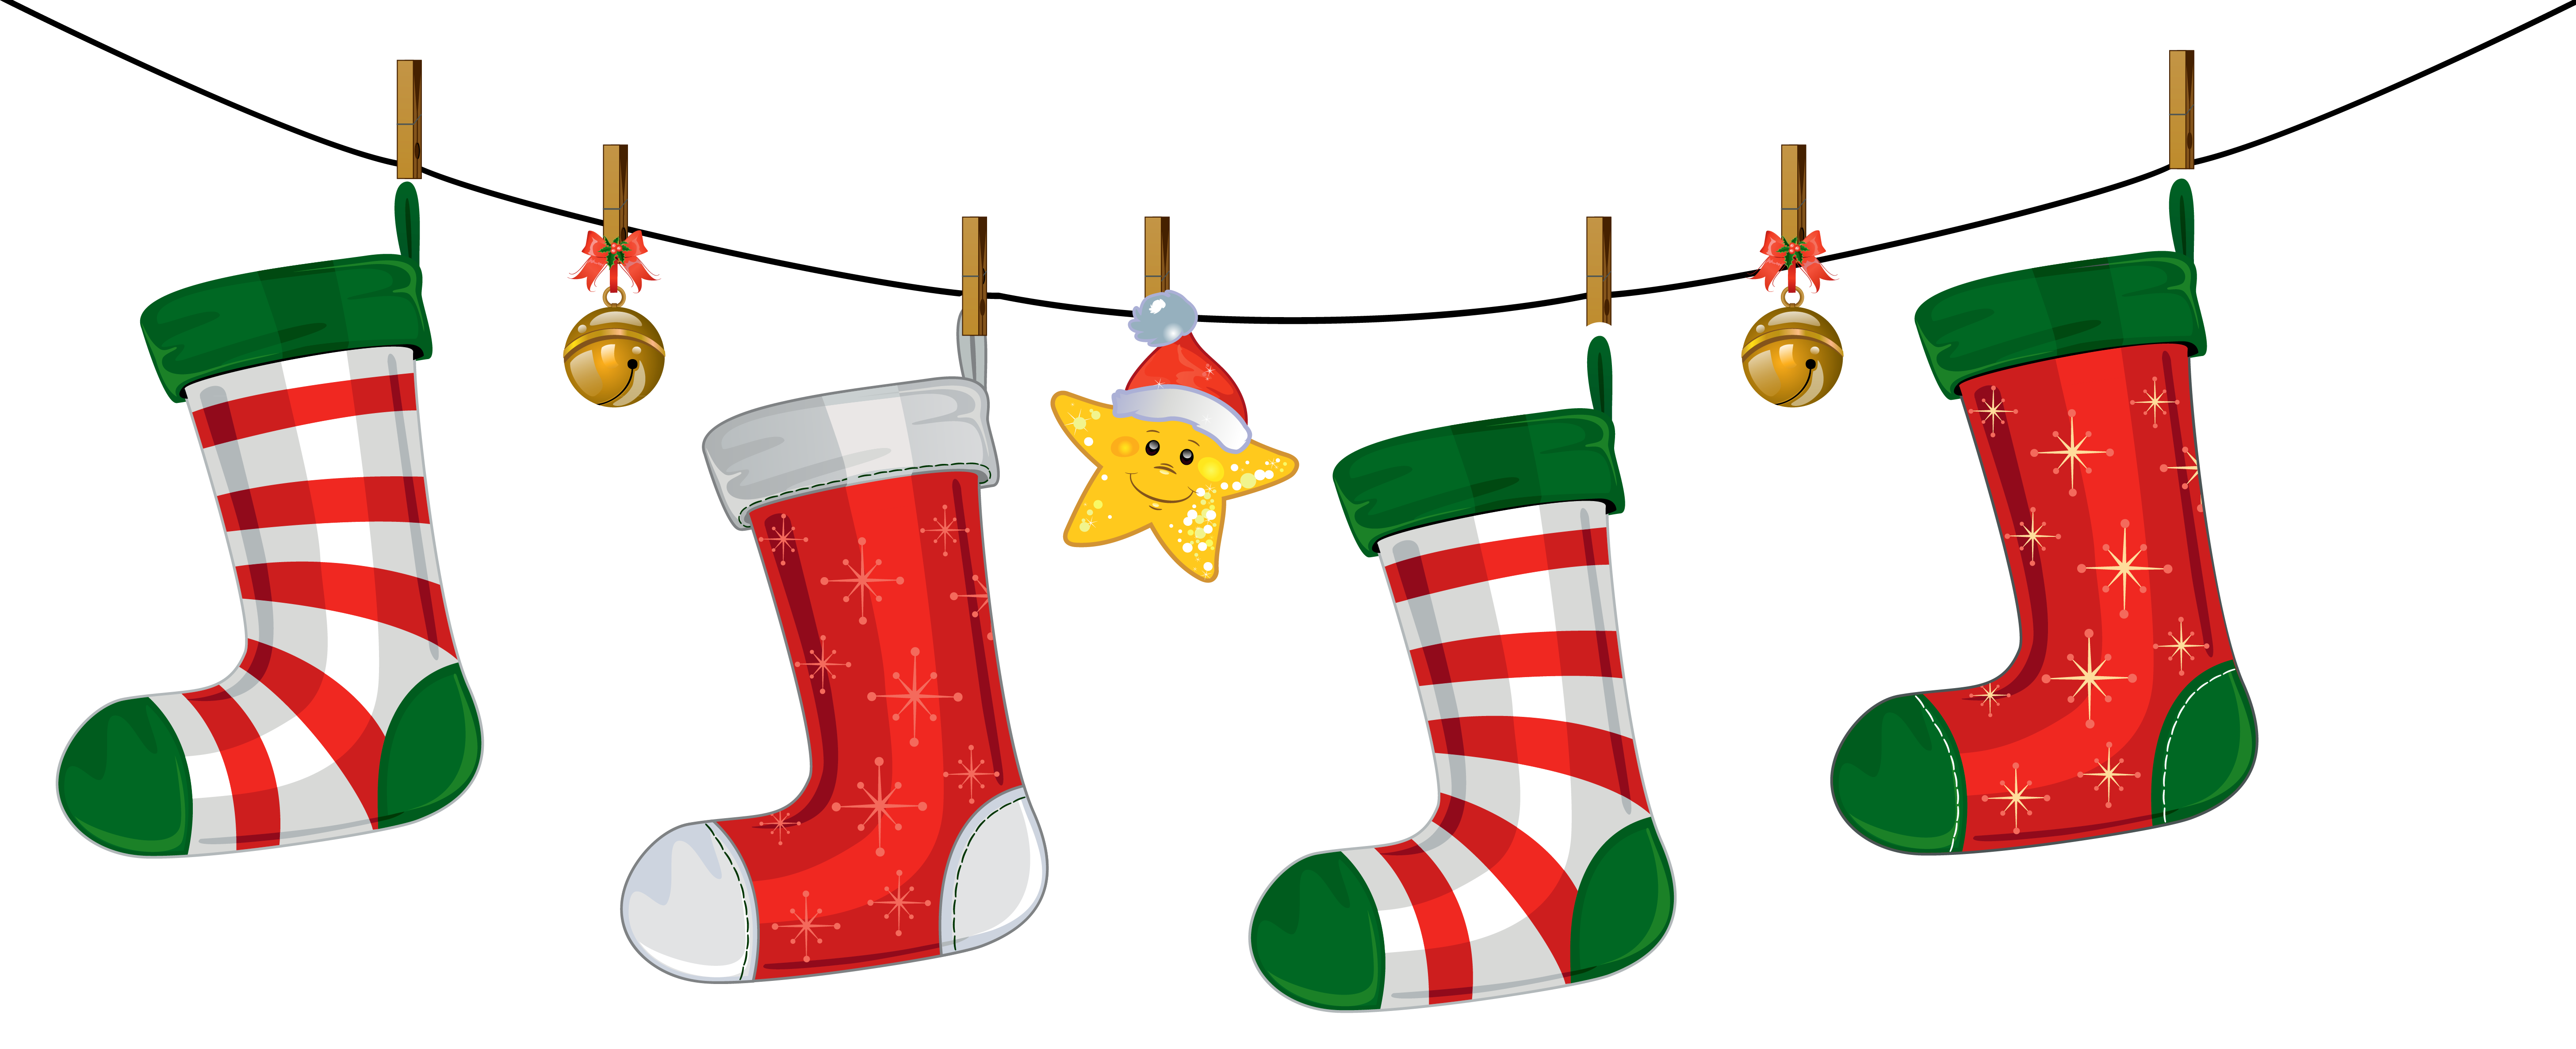 Transparent_Christmas_Stockings_Decoration_PNG_Clipart_